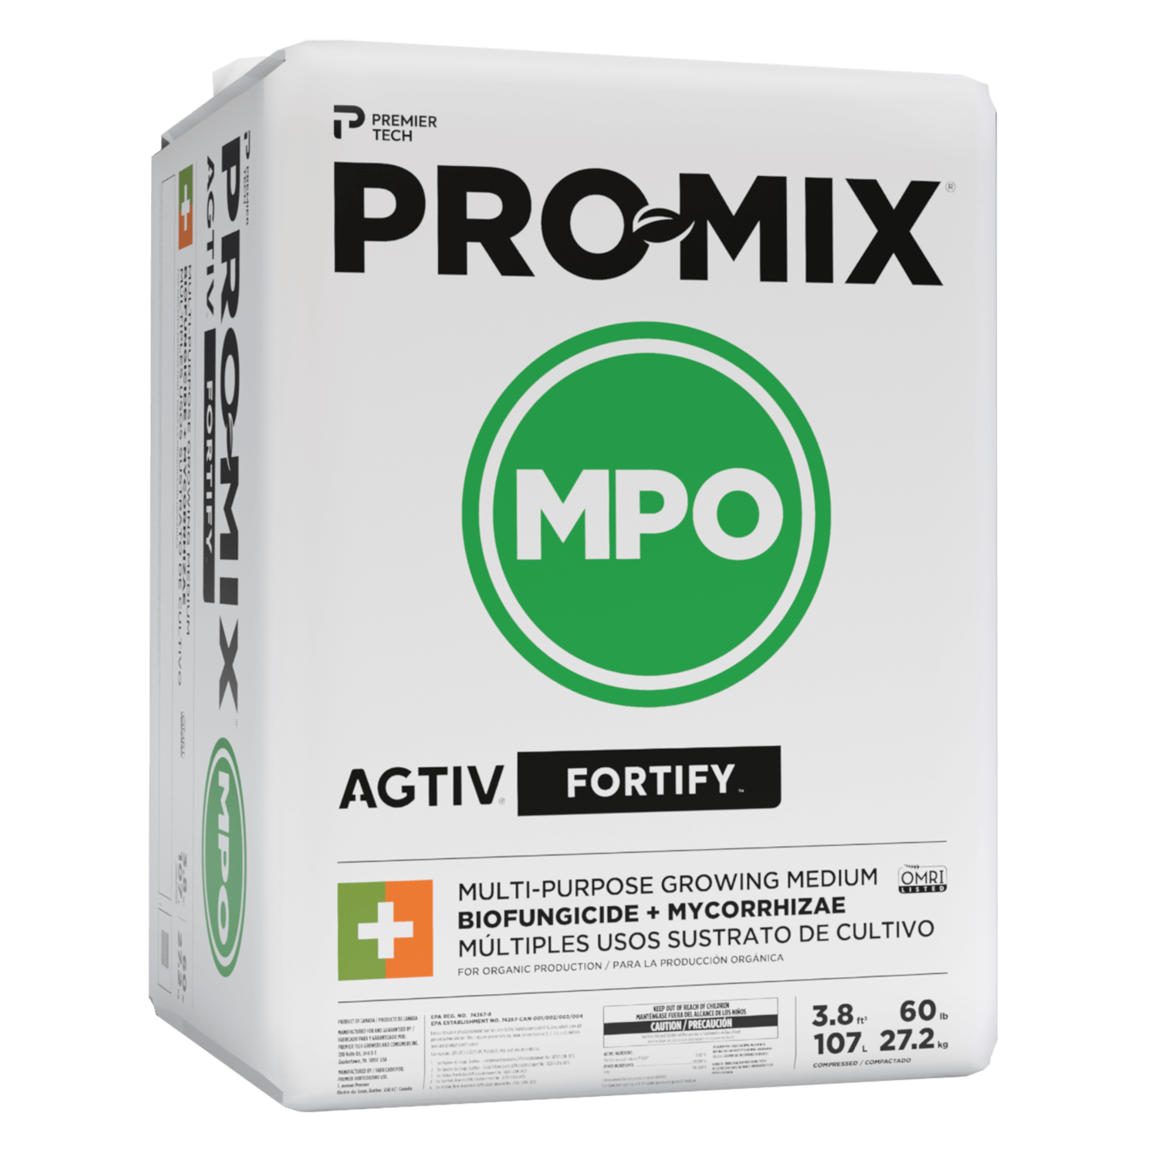 PRO-MIX MPO AGTIV FORTIFY 3.8 cu.ft.